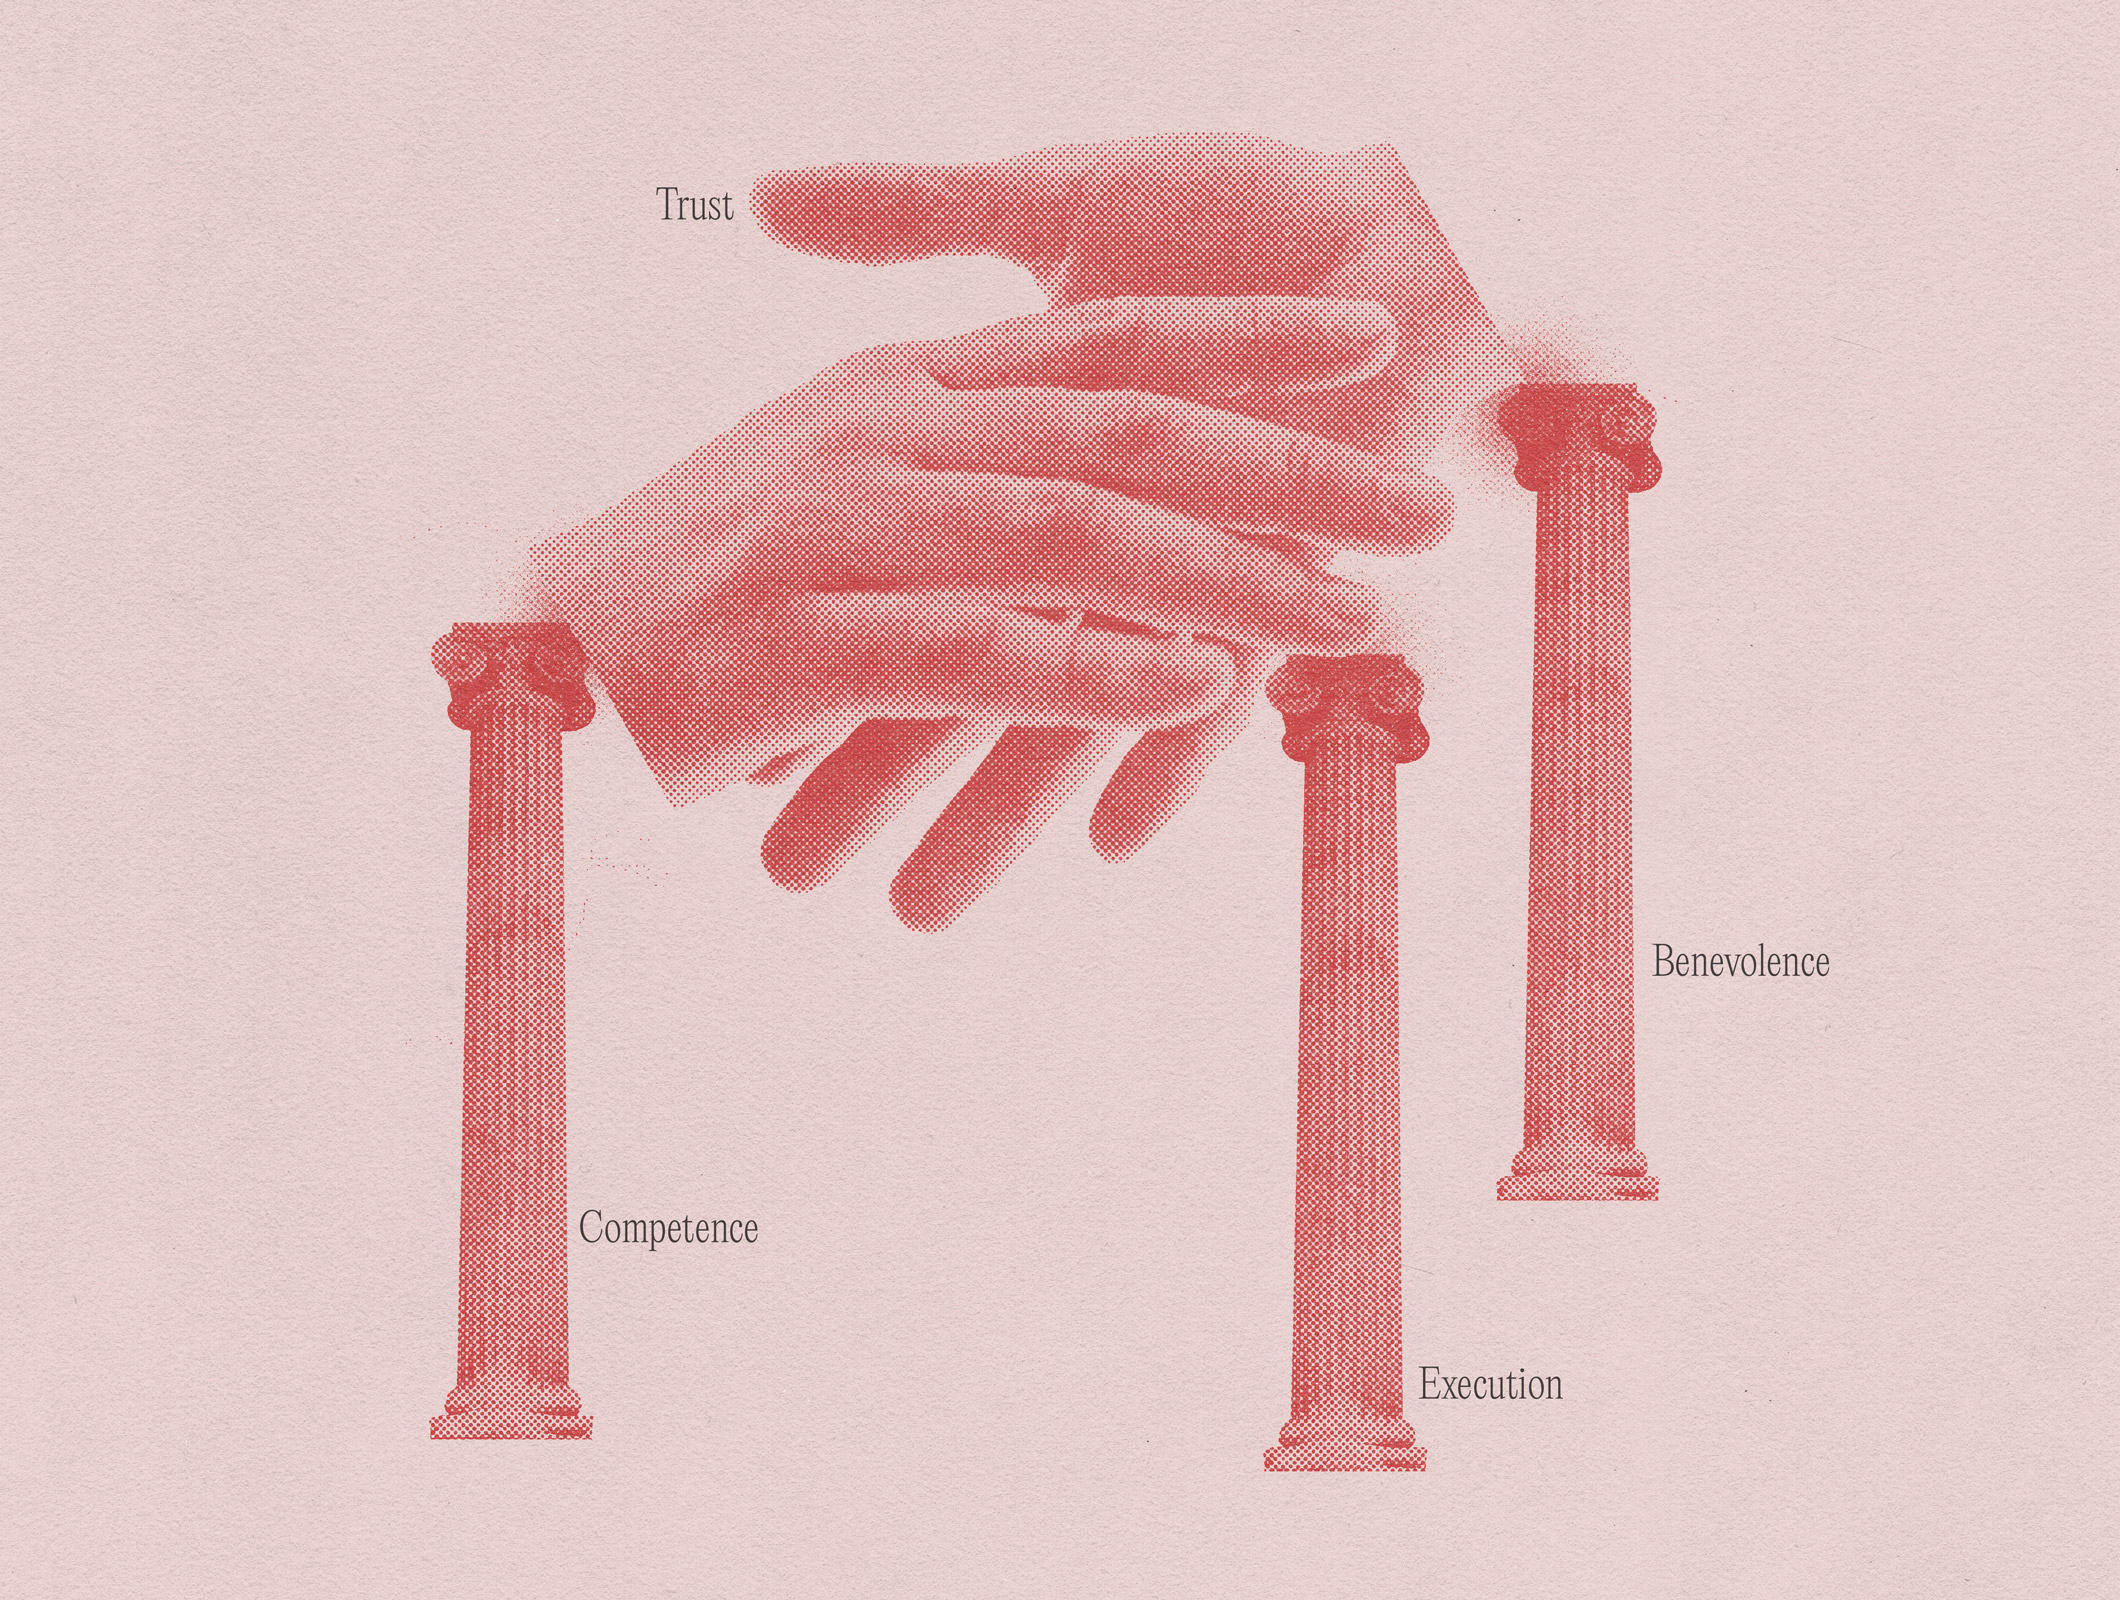 Three Grecian pillars with a handshake floating above them.